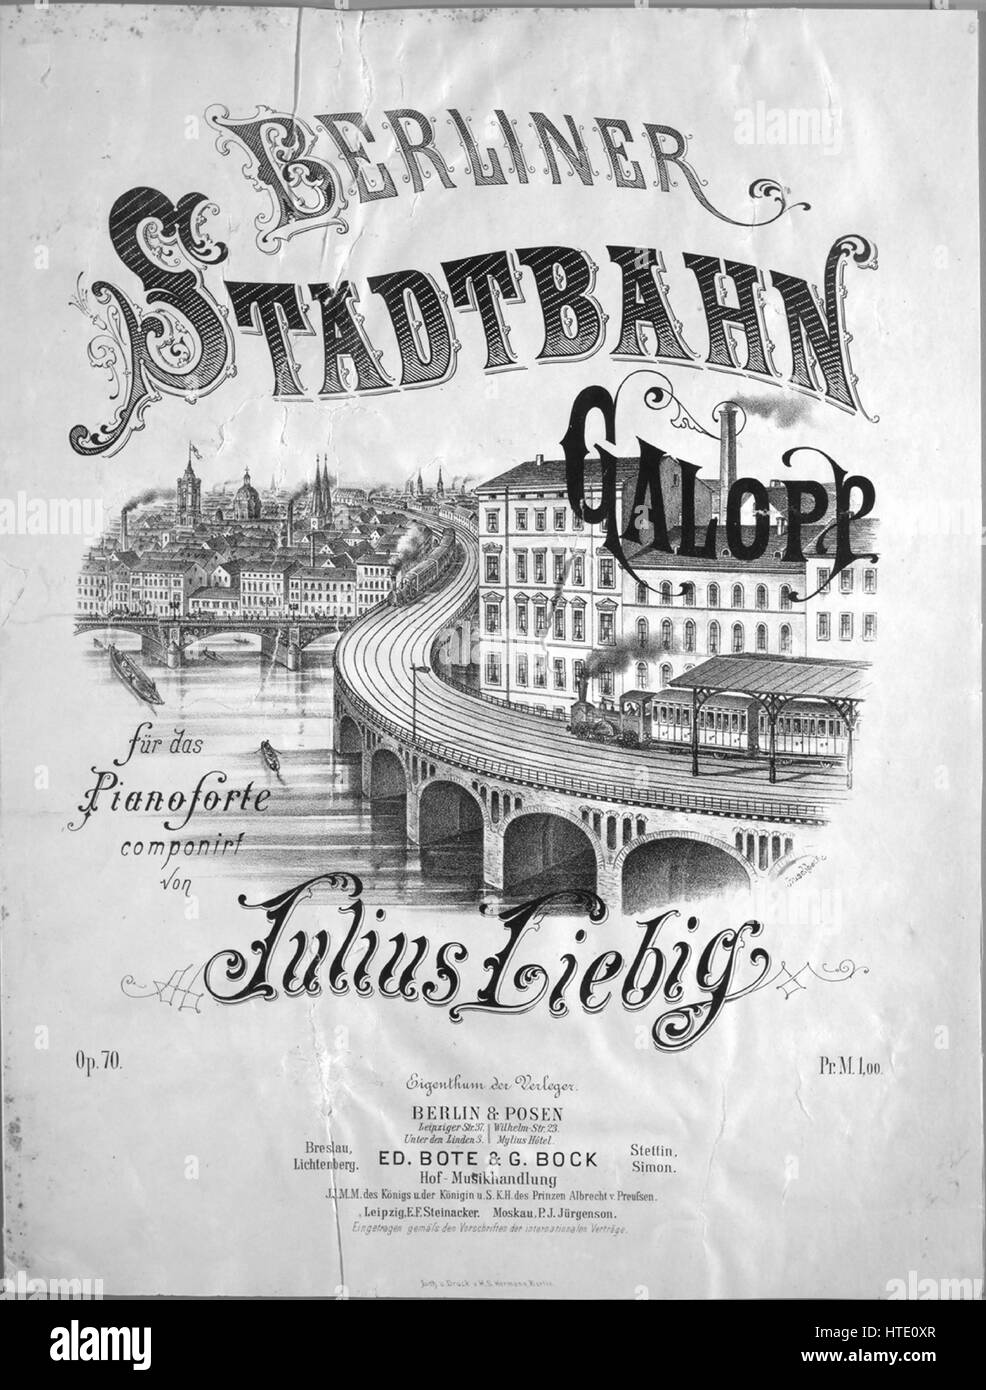 Sheet music cover image of the song 'Berliner Stadtbahn Galopp fur das Pianoforte', with original authorship notes reading 'Componirt von Julius Liebig', 1900. The publisher is listed as 'Ed. Bote and G. Bock, Leipziger Str. 37, Unter den Linden 3', the form of composition is 'da capo, with trio', the instrumentation is 'piano', the first line reads 'None', and the illustration artist is listed as 'Lith. u. Druck V. M.S. Hermann, Berlin.; Buschback.'. Stock Photo